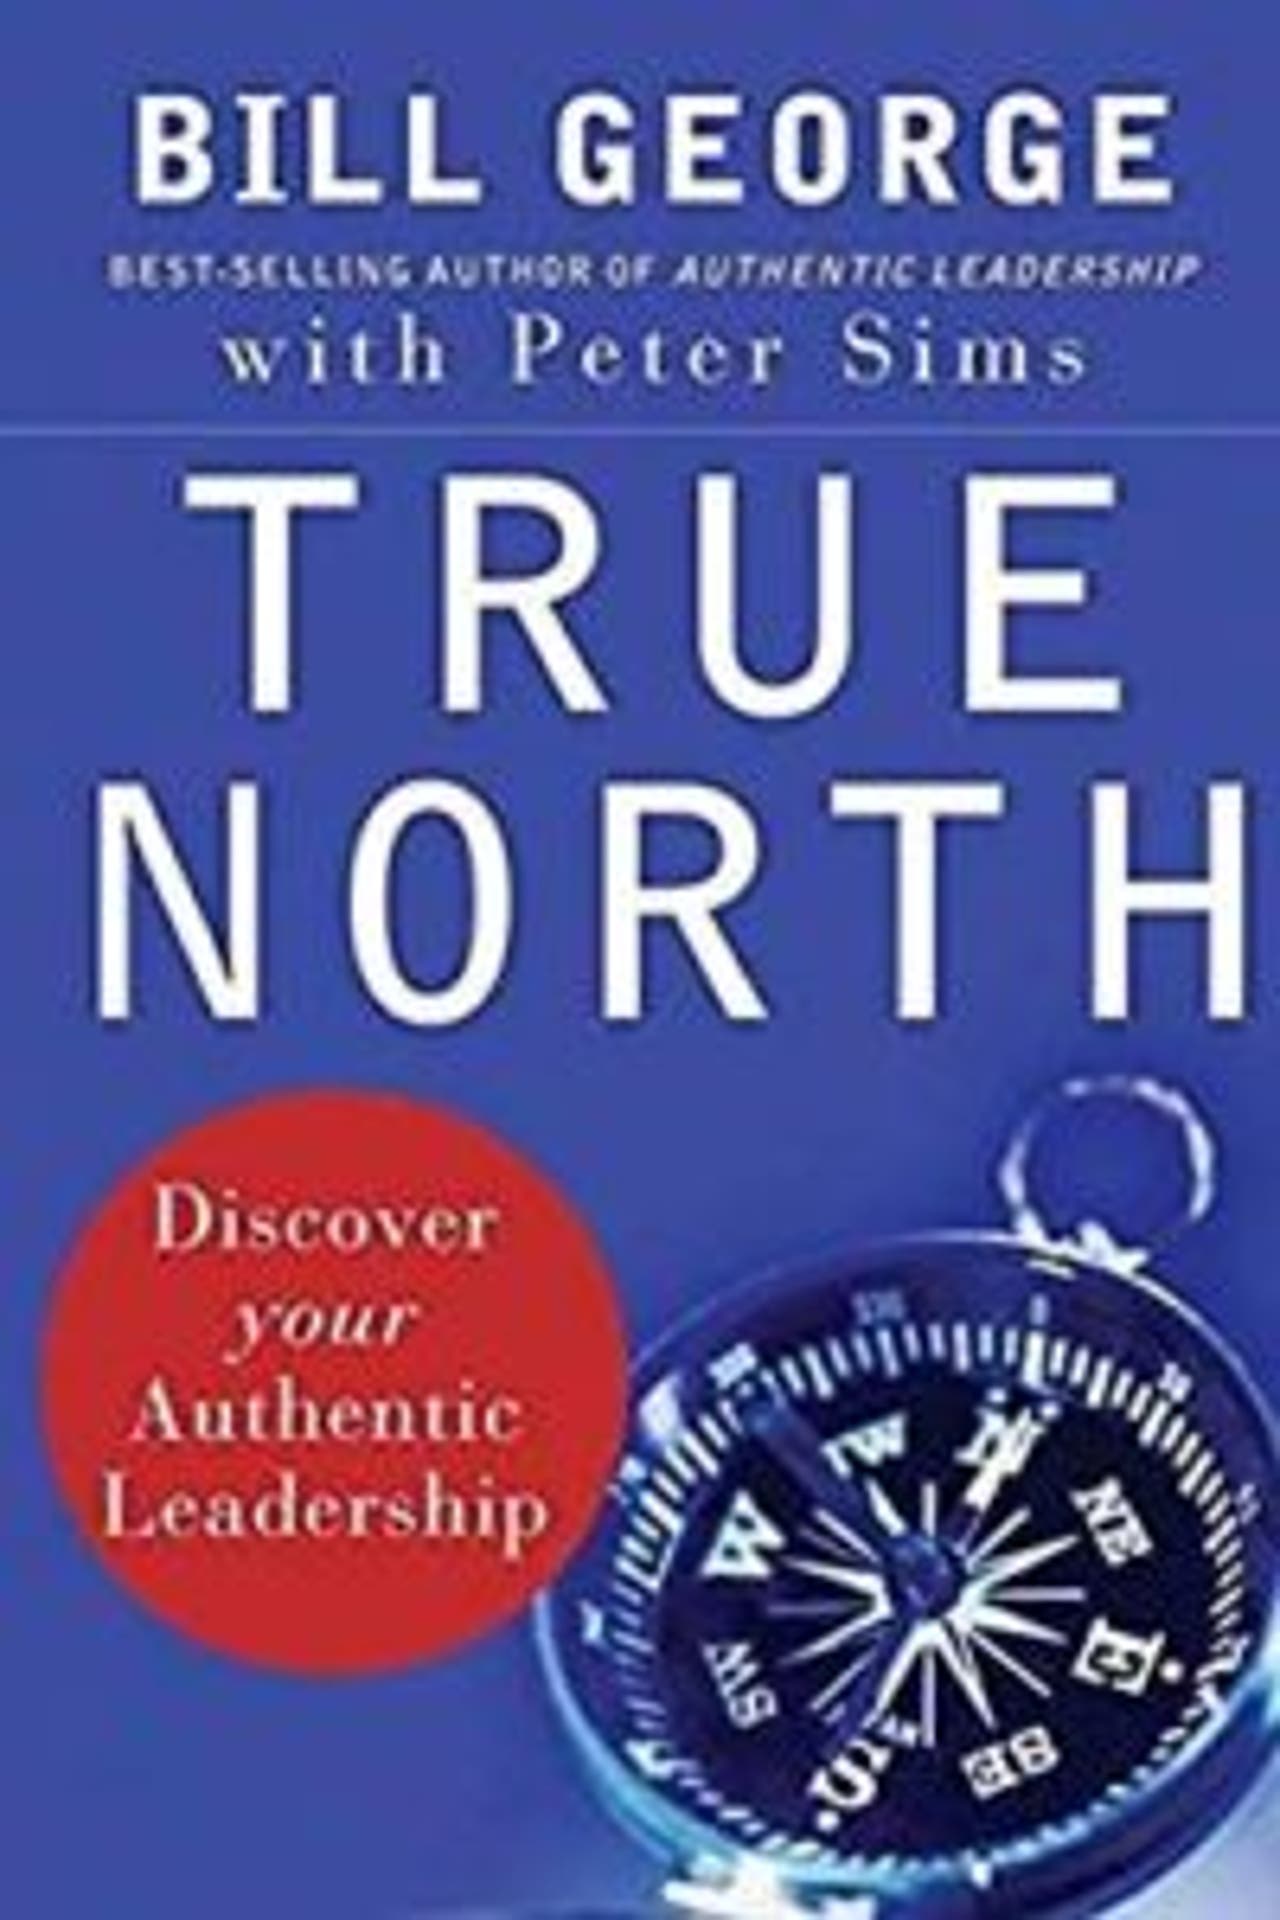 True North- Discover Your Authentic Leadership by Bill George and Peter Sims